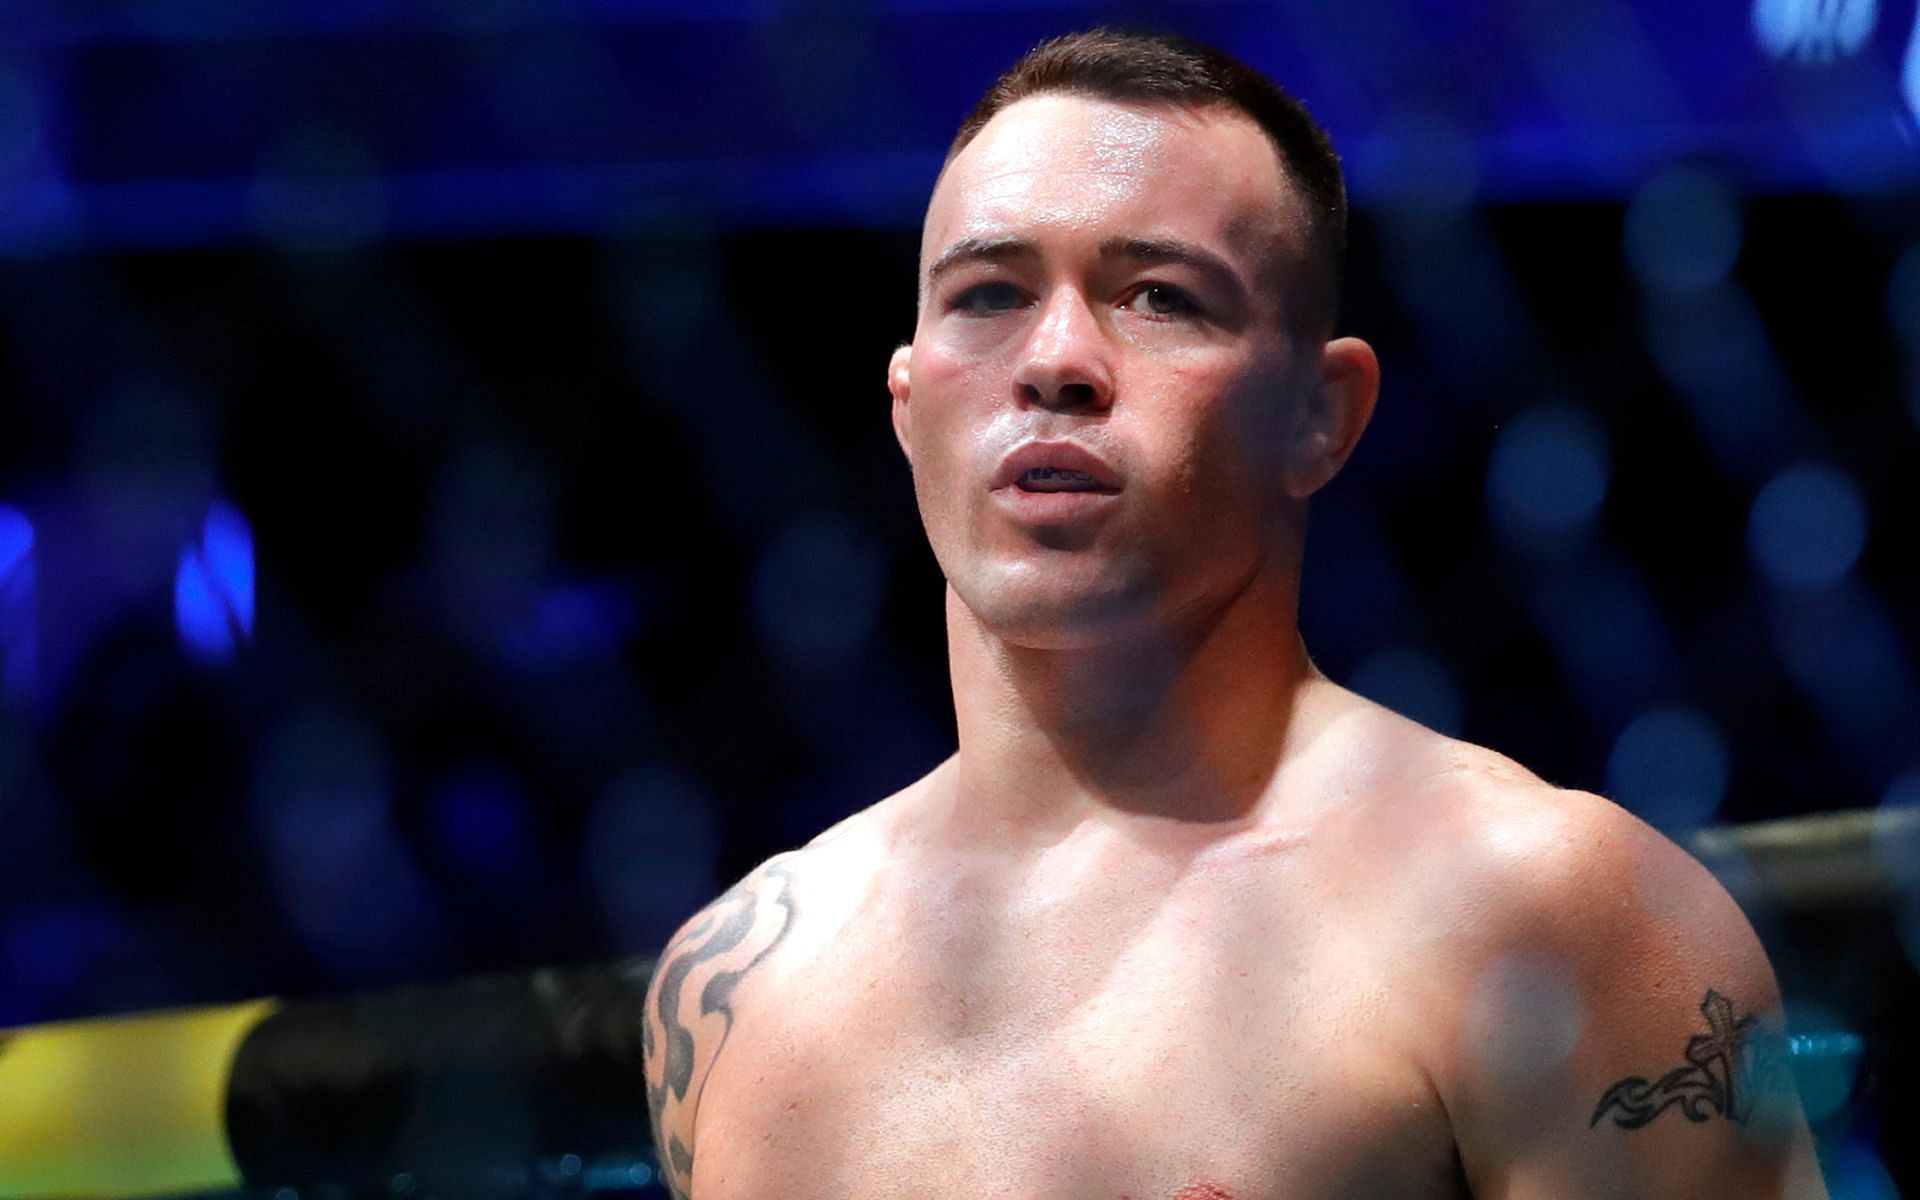 Colby Covington is widely-revered for his outstanding wrestling prowess and incredible cardio